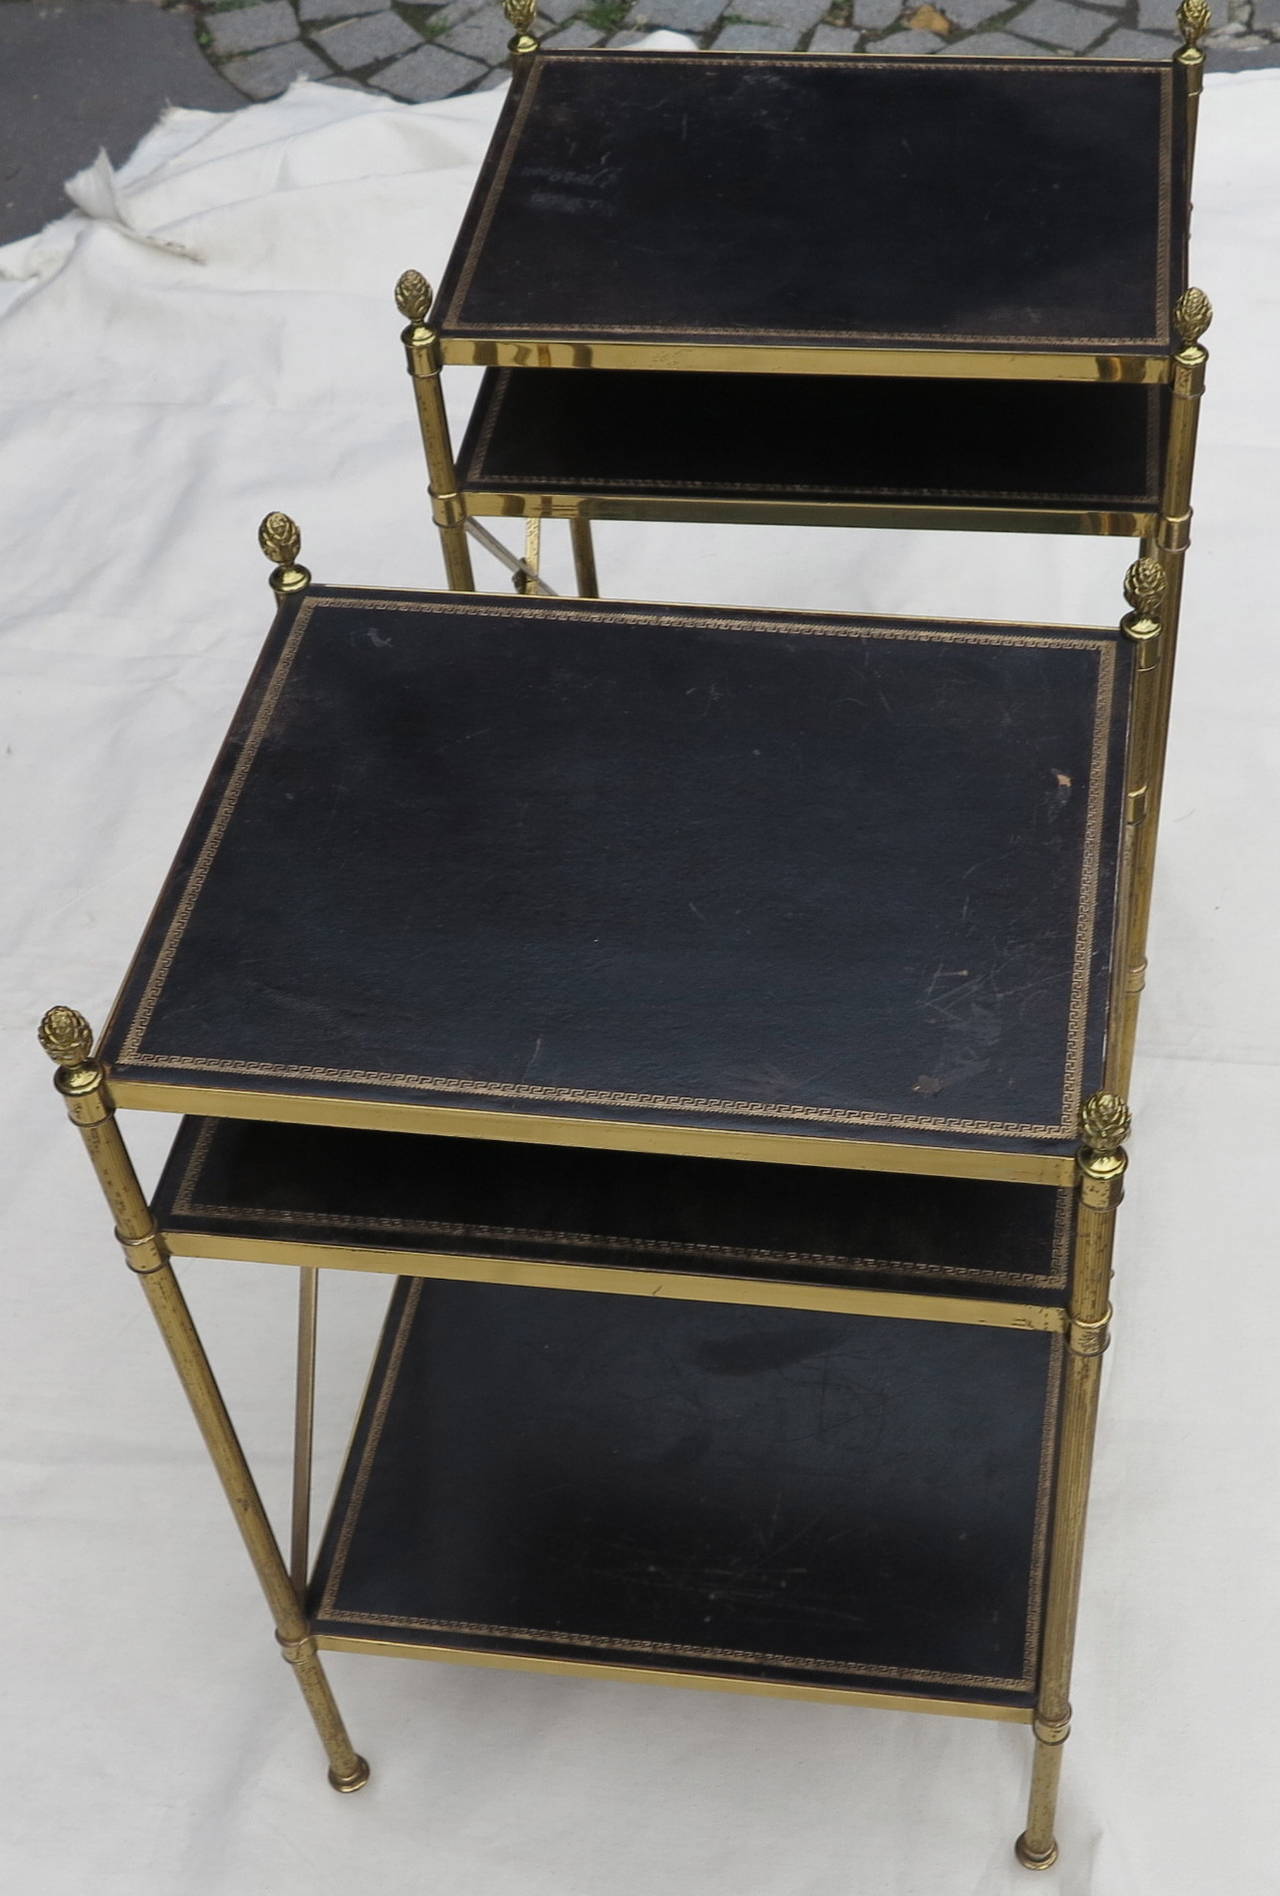 Gilt Pair of Ends of Sofas or Shelves has Three Levels Maison Bagués